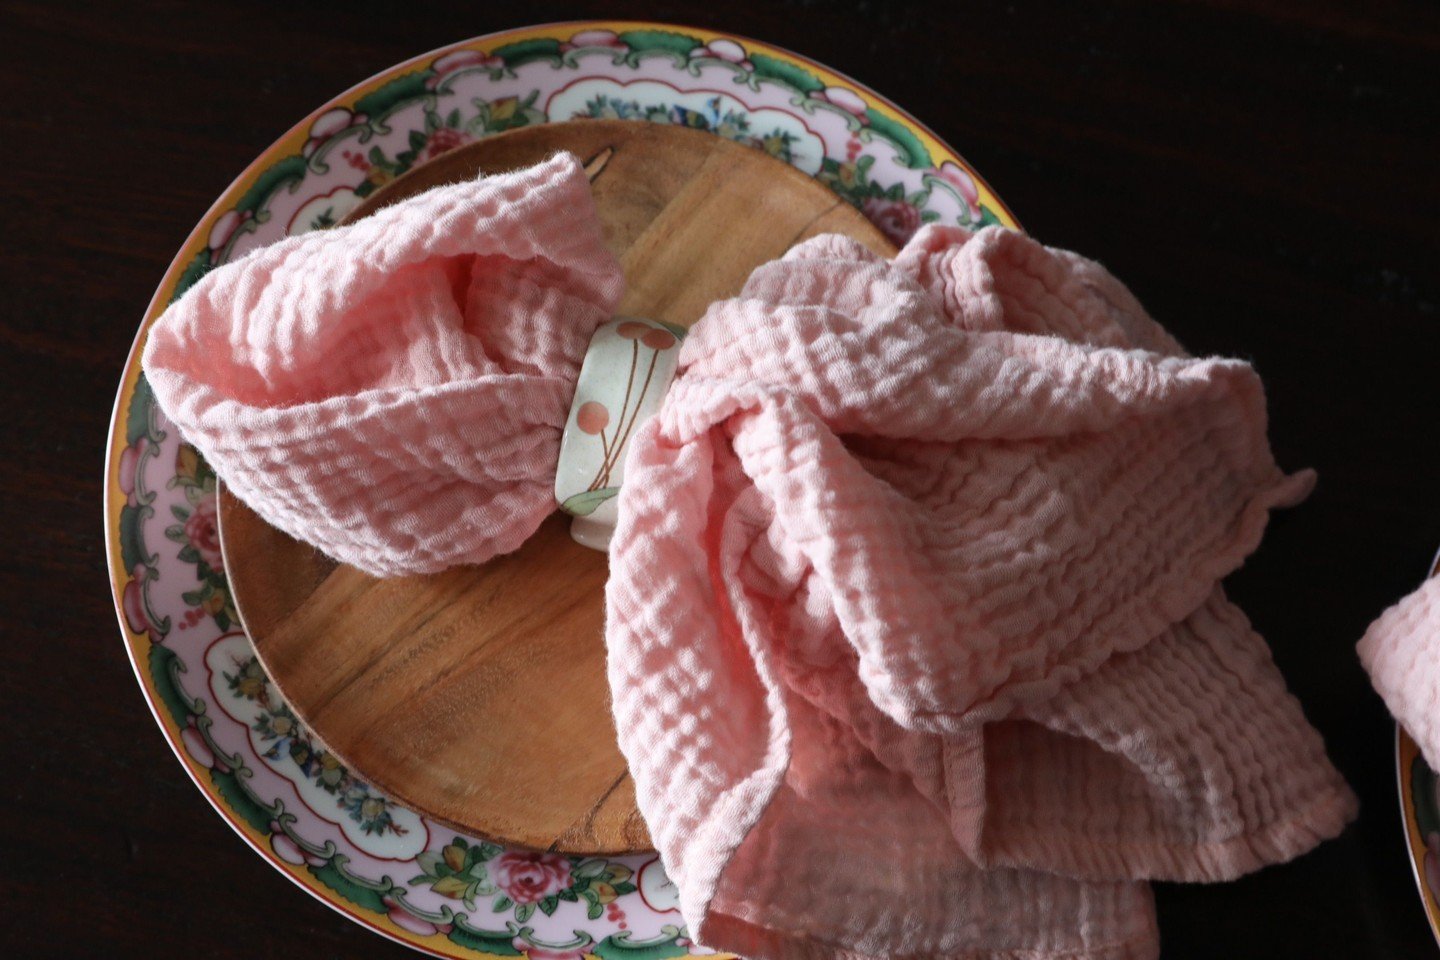 Ripple cotton napkins are a great choice for Spring tablescapes! Easy care and super soft! Mix them with your favorite plates and vintage napkin rings! 

#tablescapes #sustainableliving #vintagelove